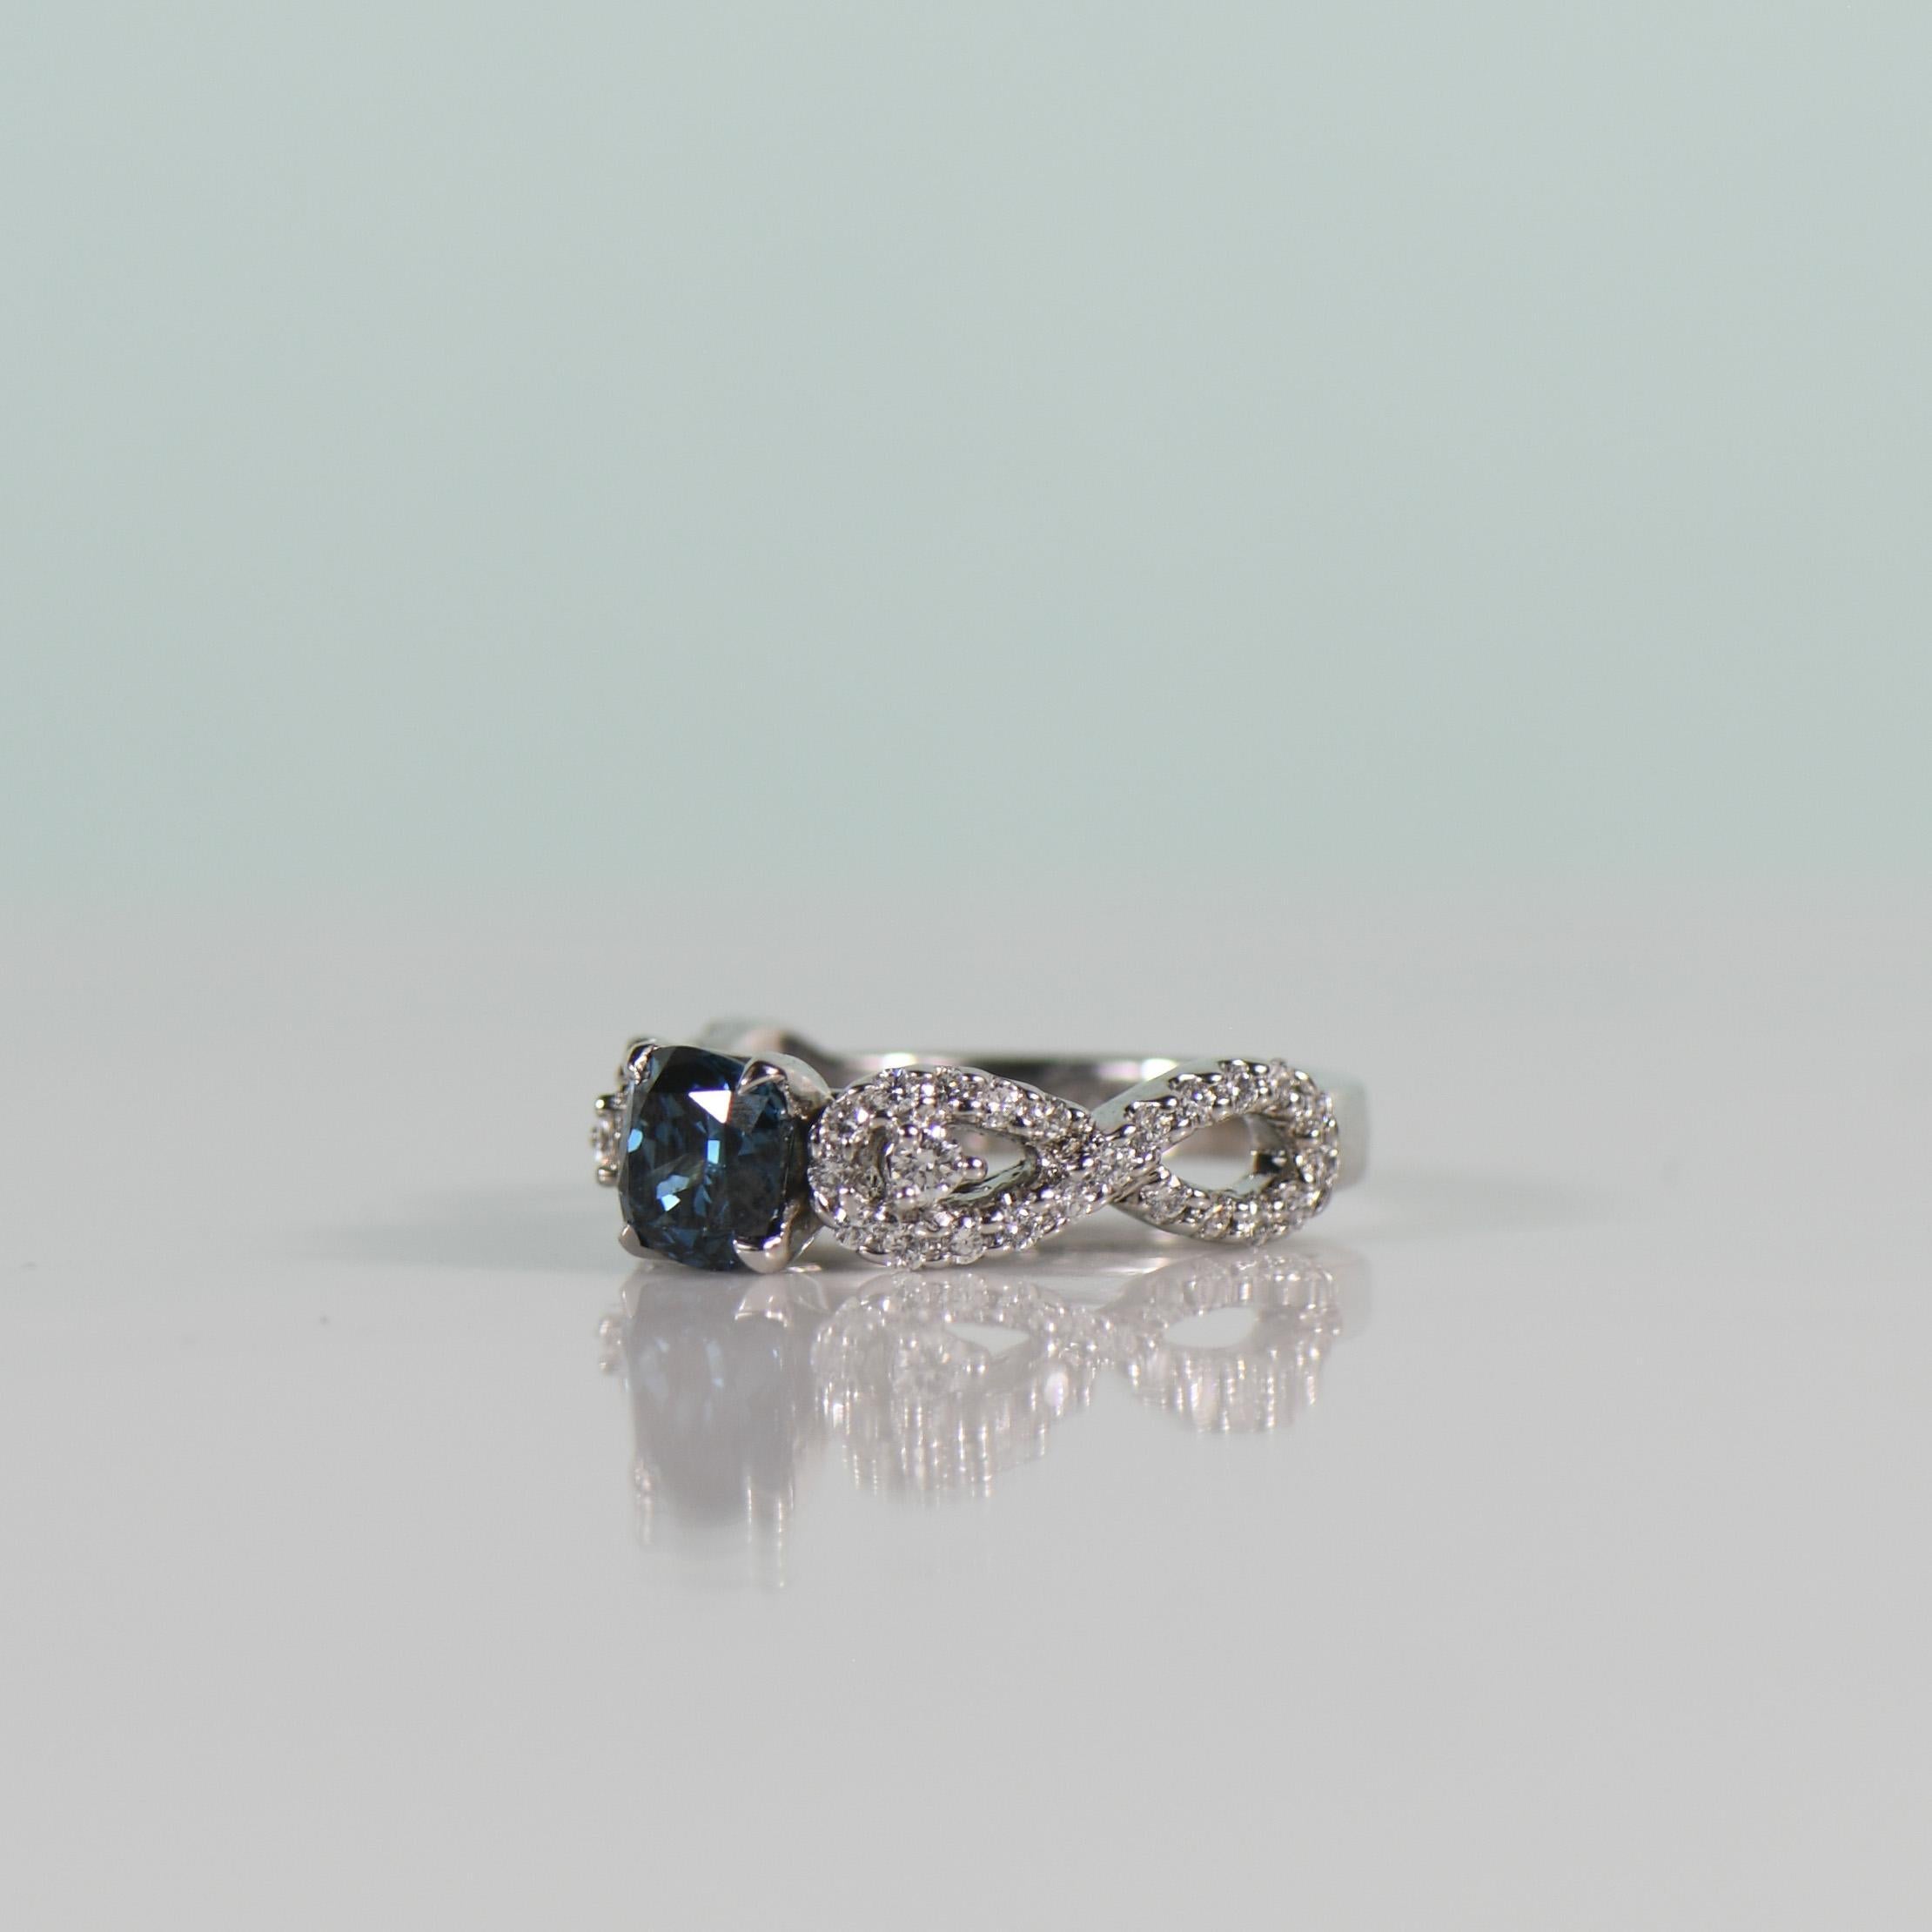 Electric Blue 1.04ct Cushion Cut Diamond in Diamond Infinity Engagement Ring In Good Condition For Sale In Addison, TX